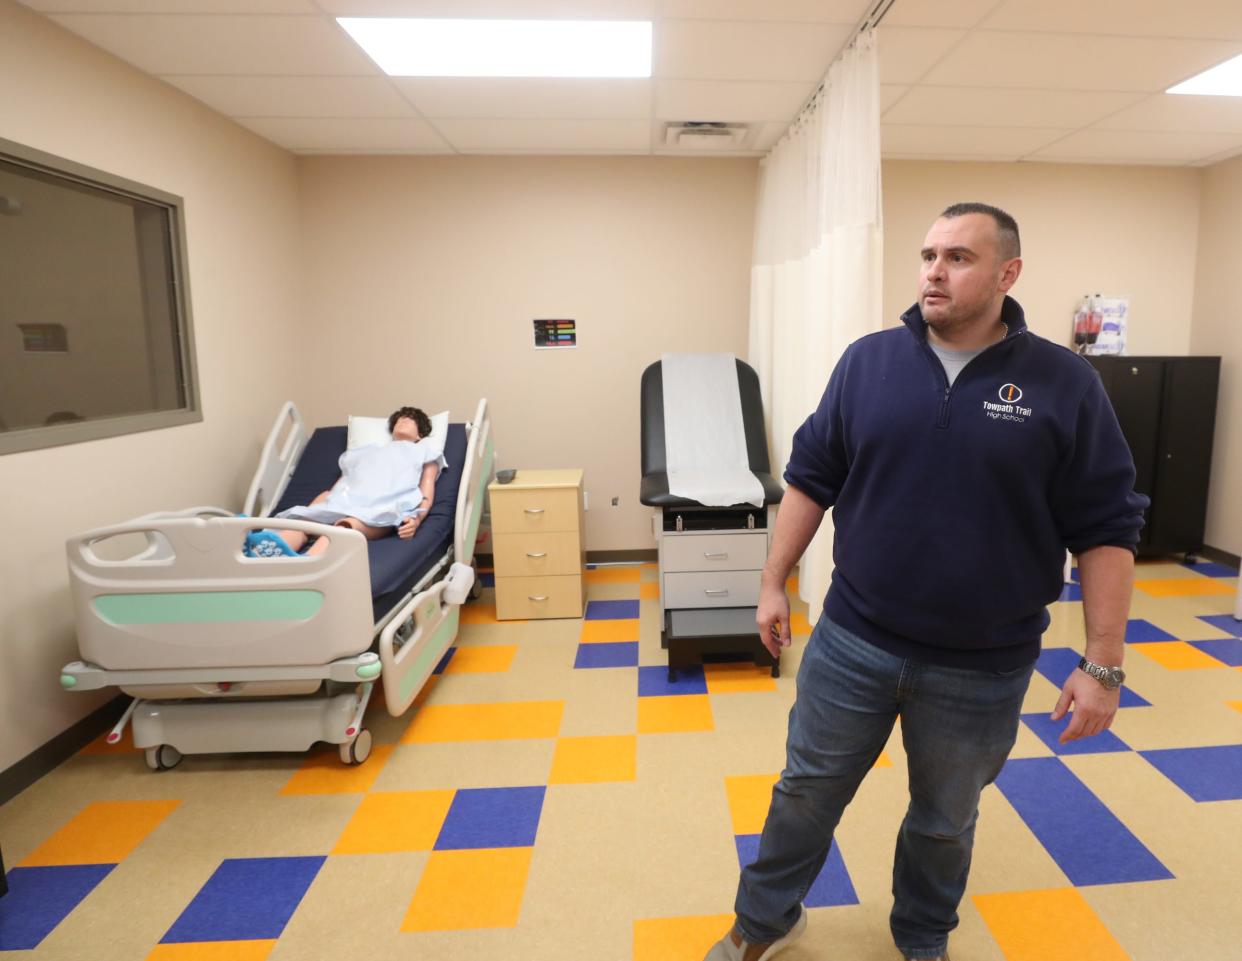 Matt Arshinkoff, director of Towpath Trail High School Barberton campus, talks about programs available while touring the health care room on Friday.